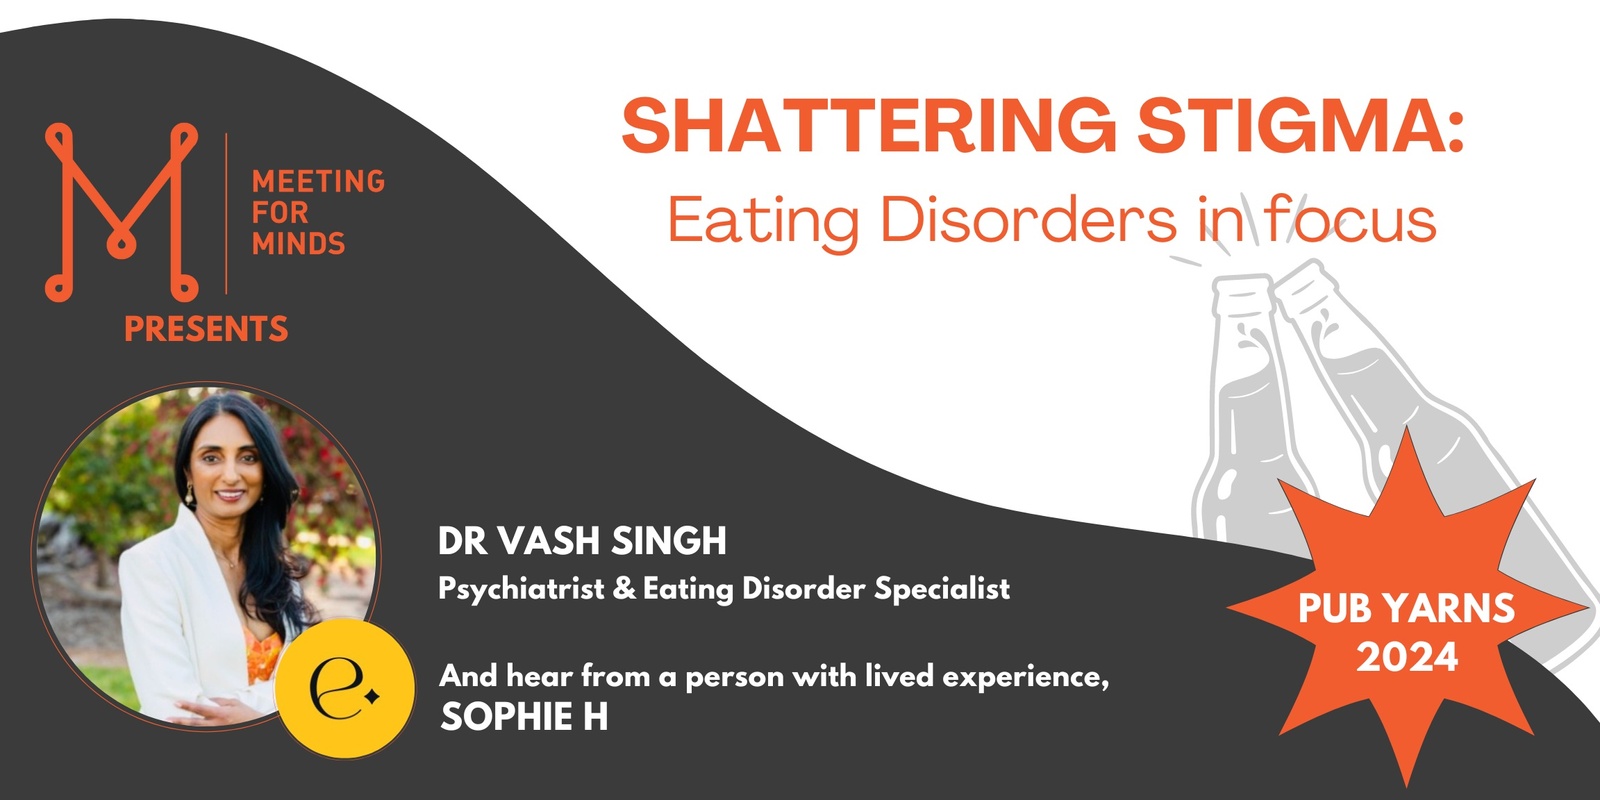 Banner image for Pub Yarns 2024 - Shattering Stigma: Eating Disorders in focus